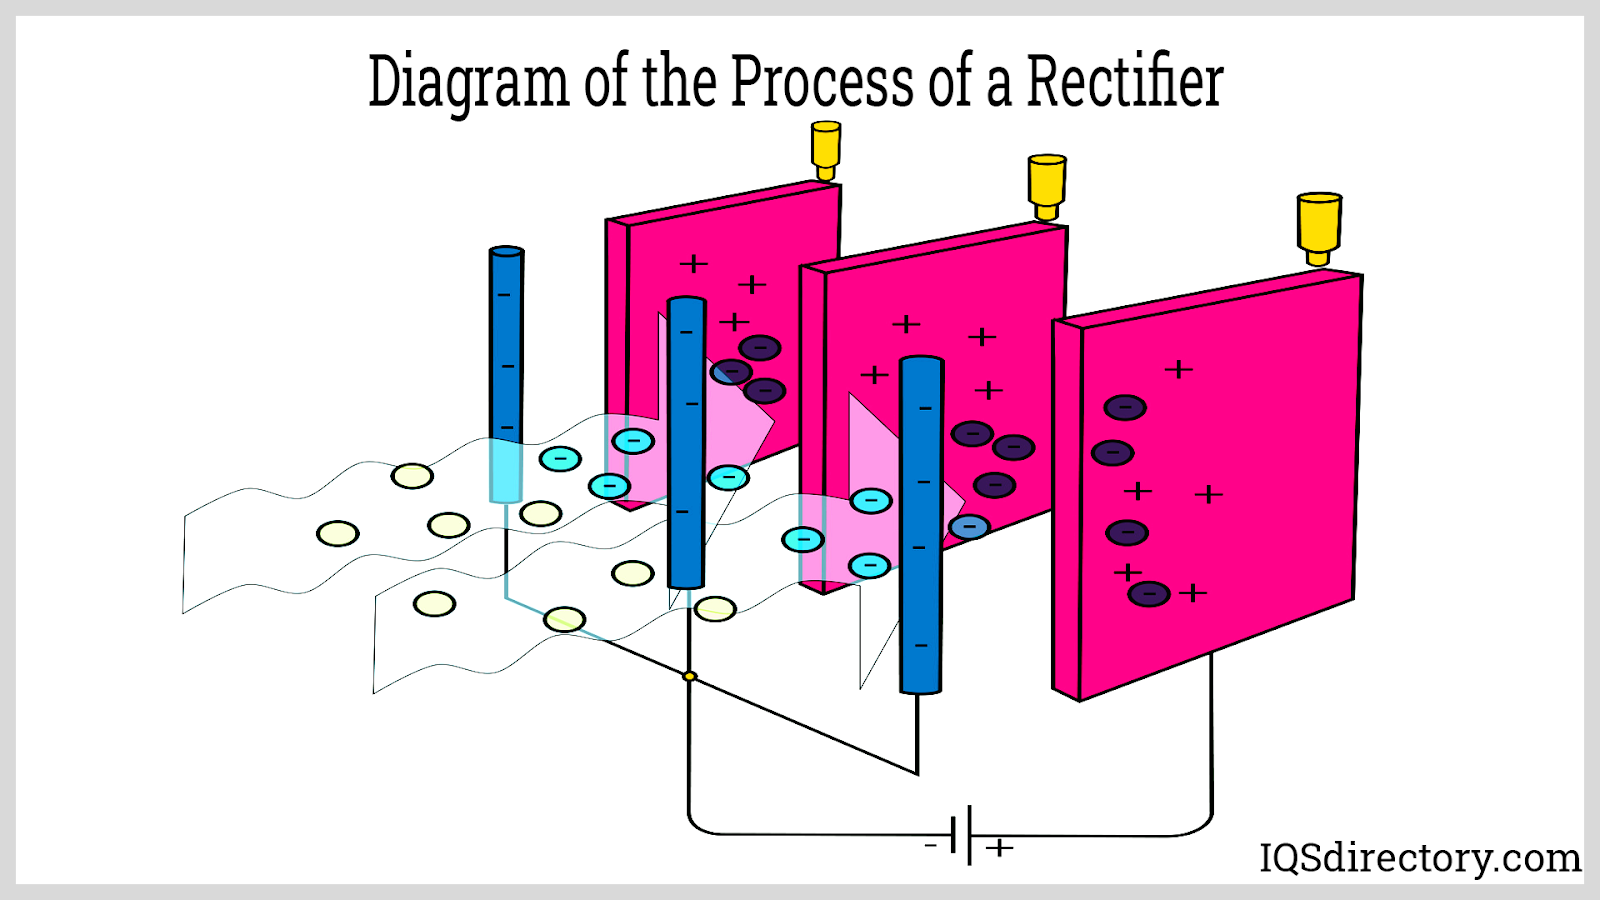 Diagram of the Process of a Rectifier